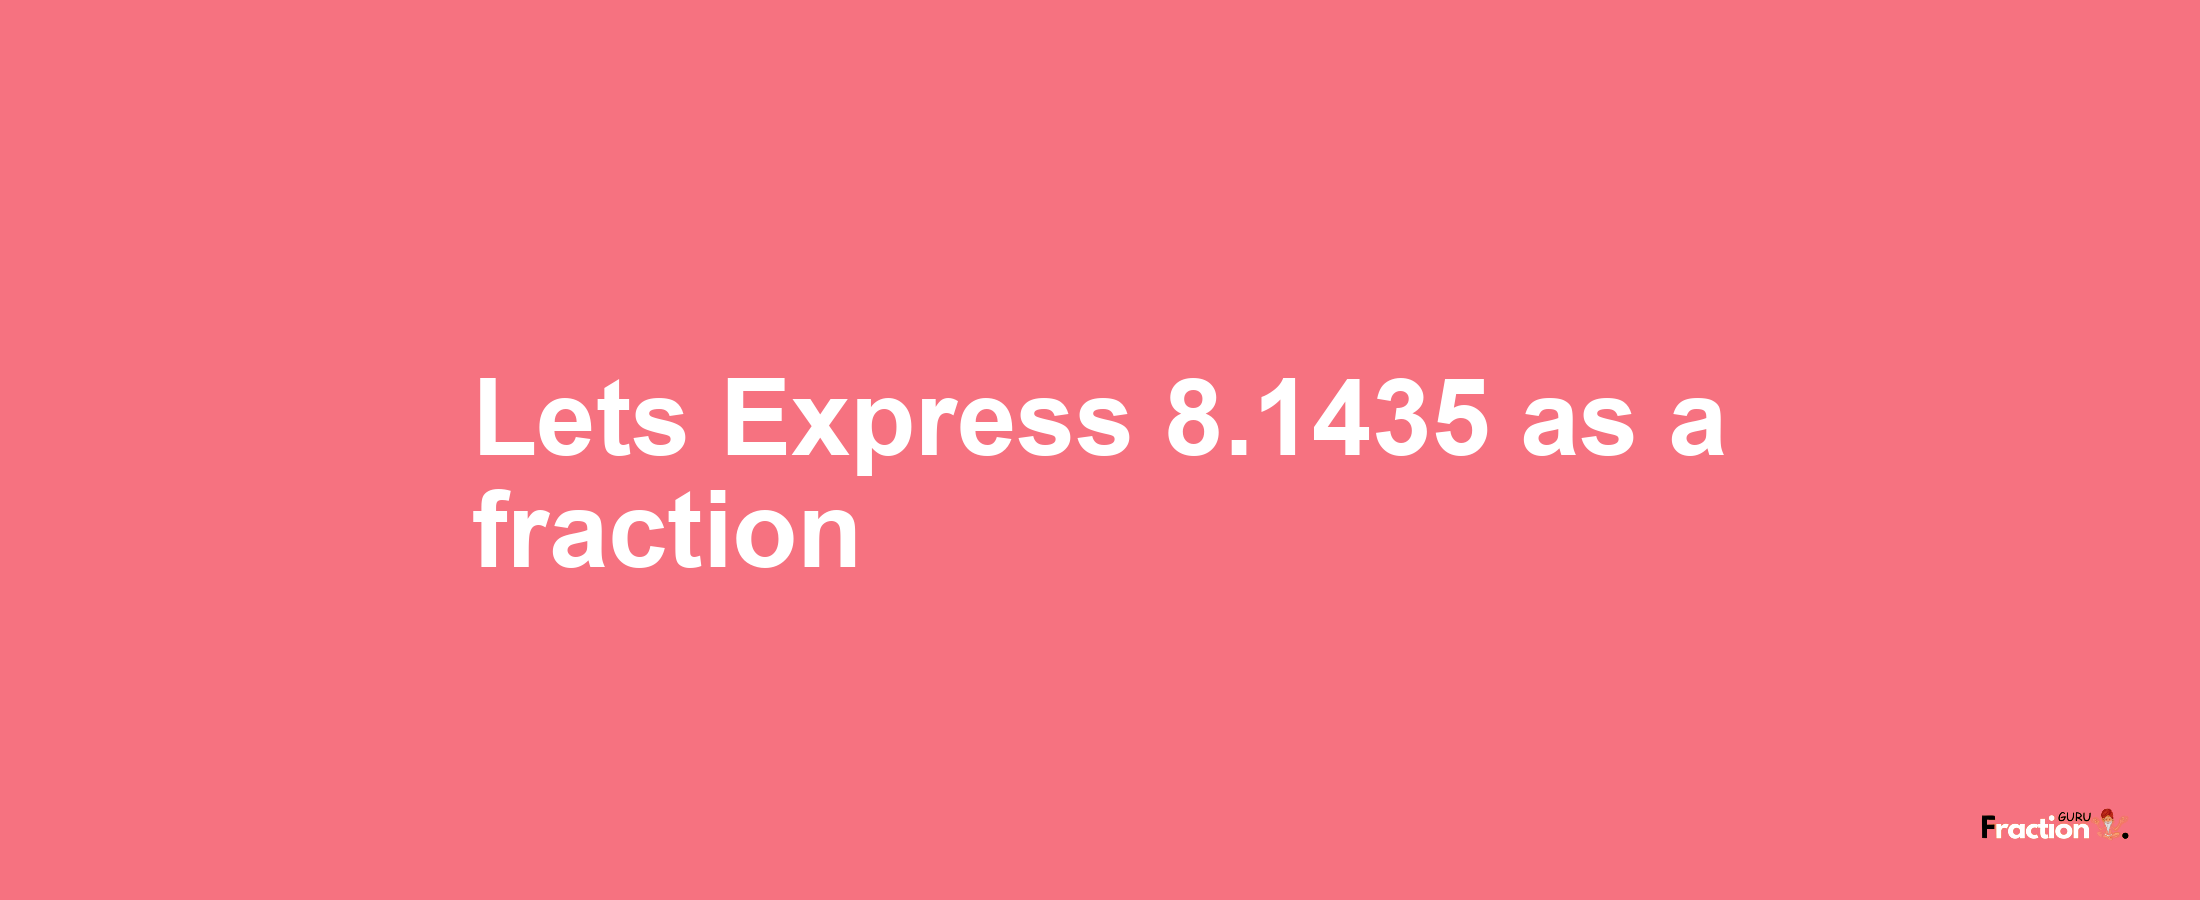 Lets Express 8.1435 as afraction